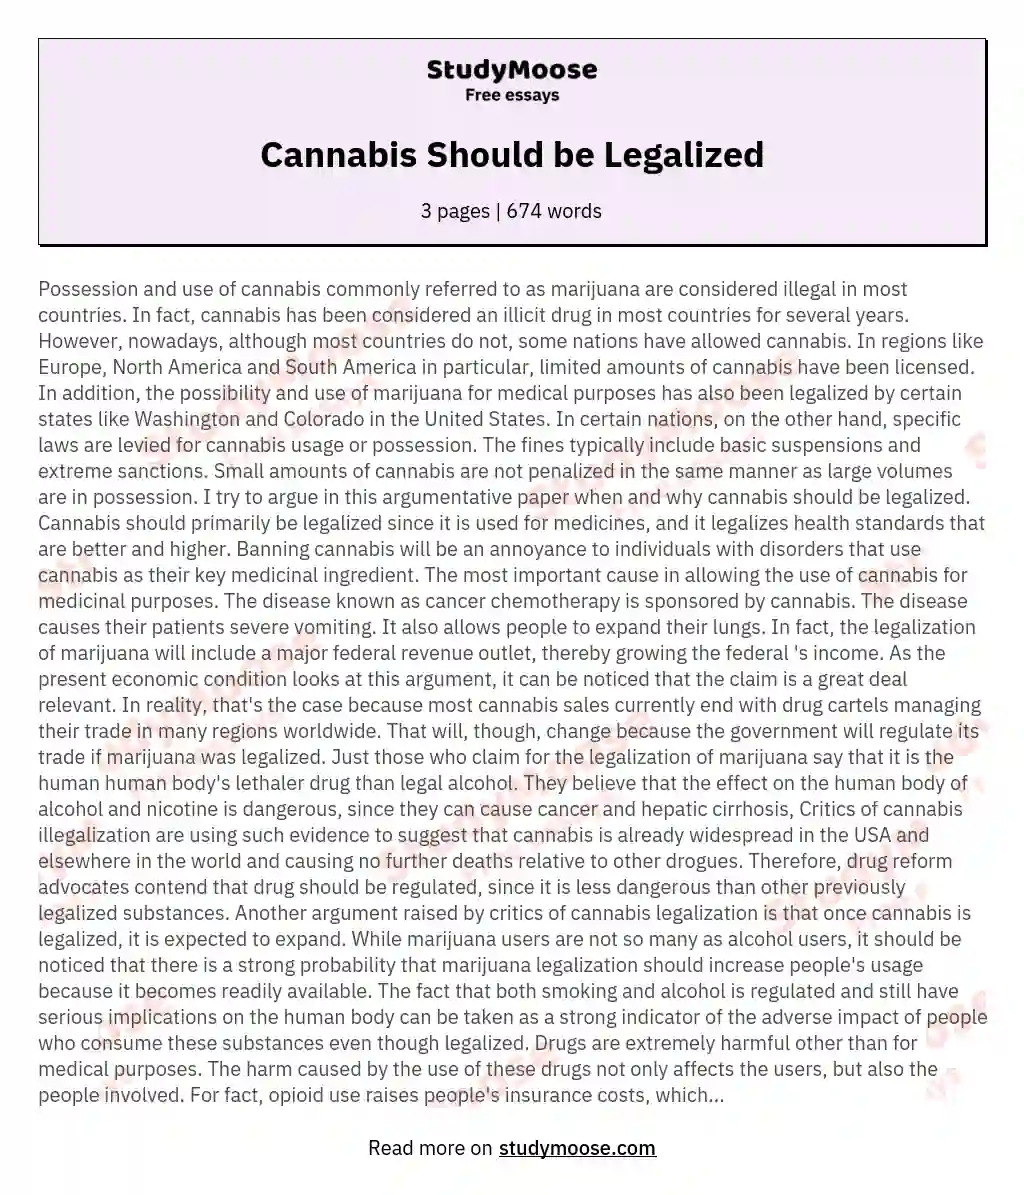 Cannabis Should be Legalized essay